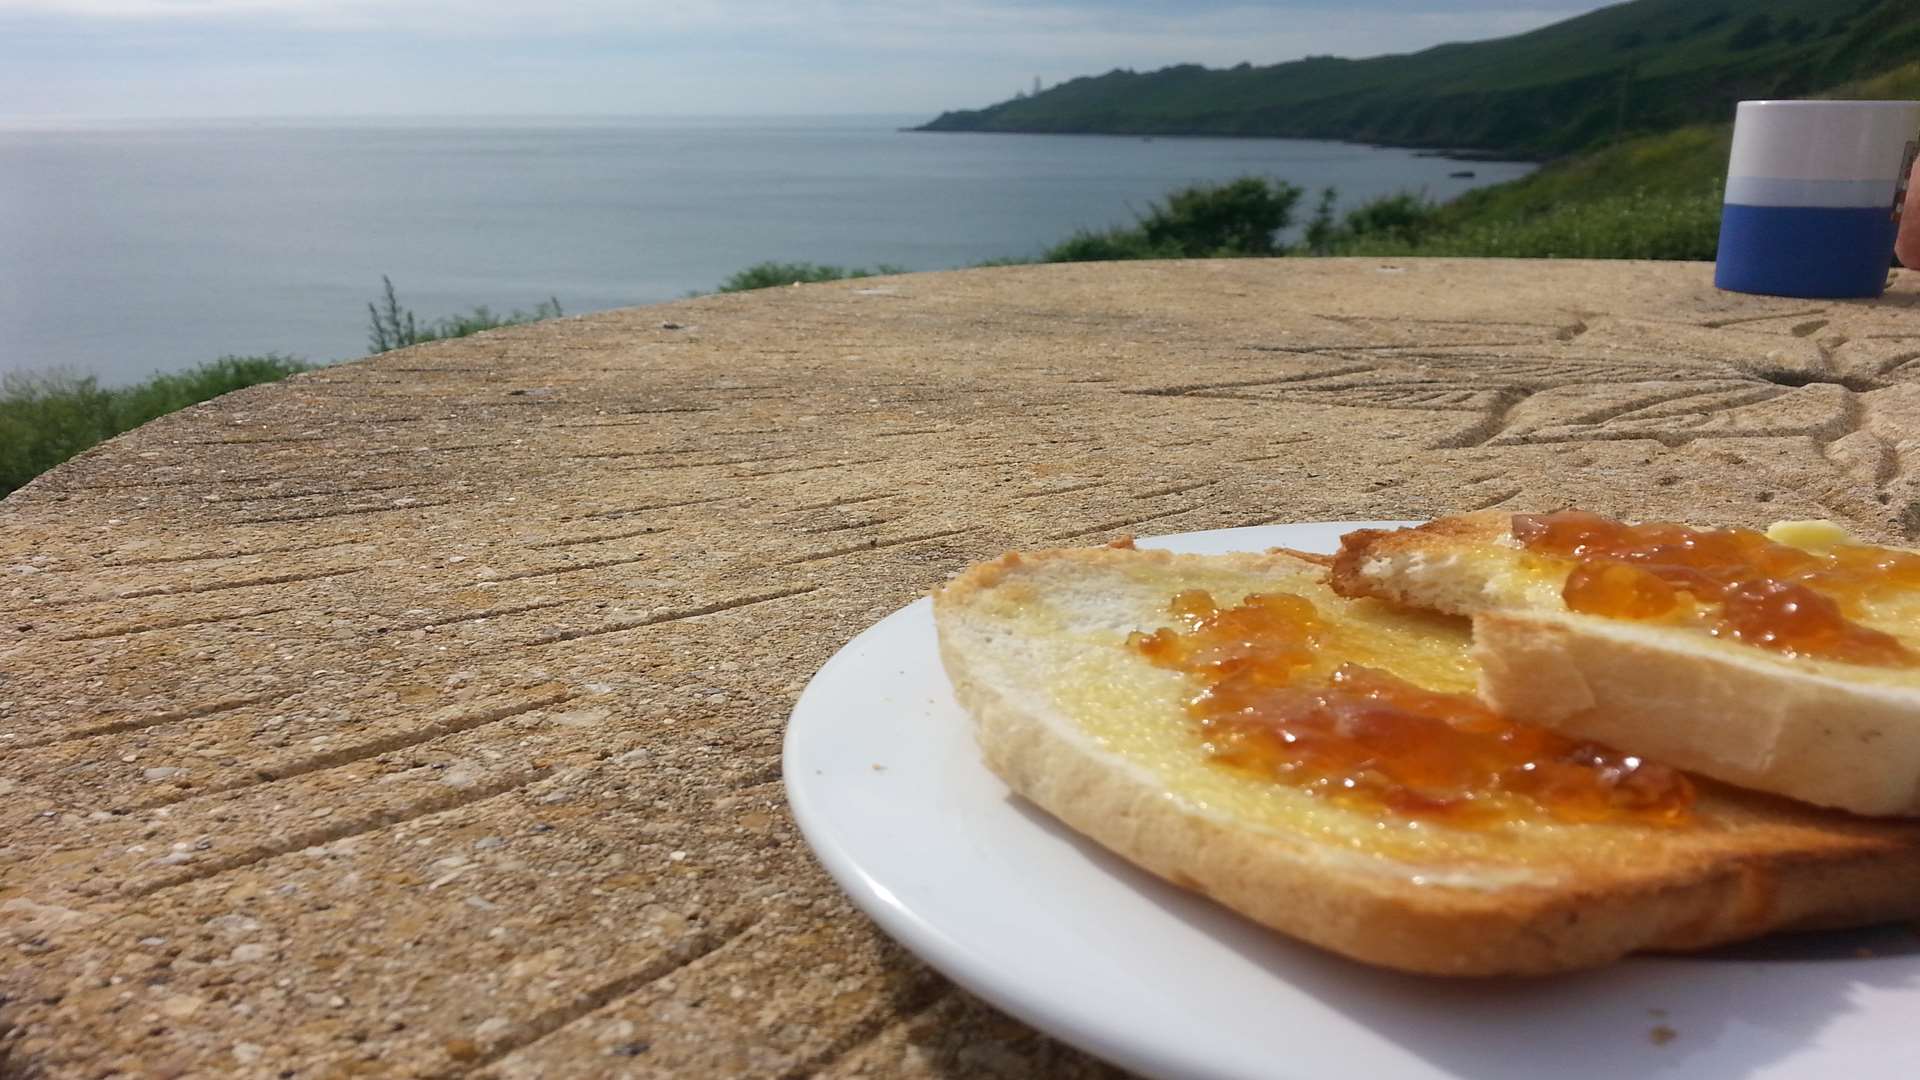 Breakfast by the sea - you can't beat it